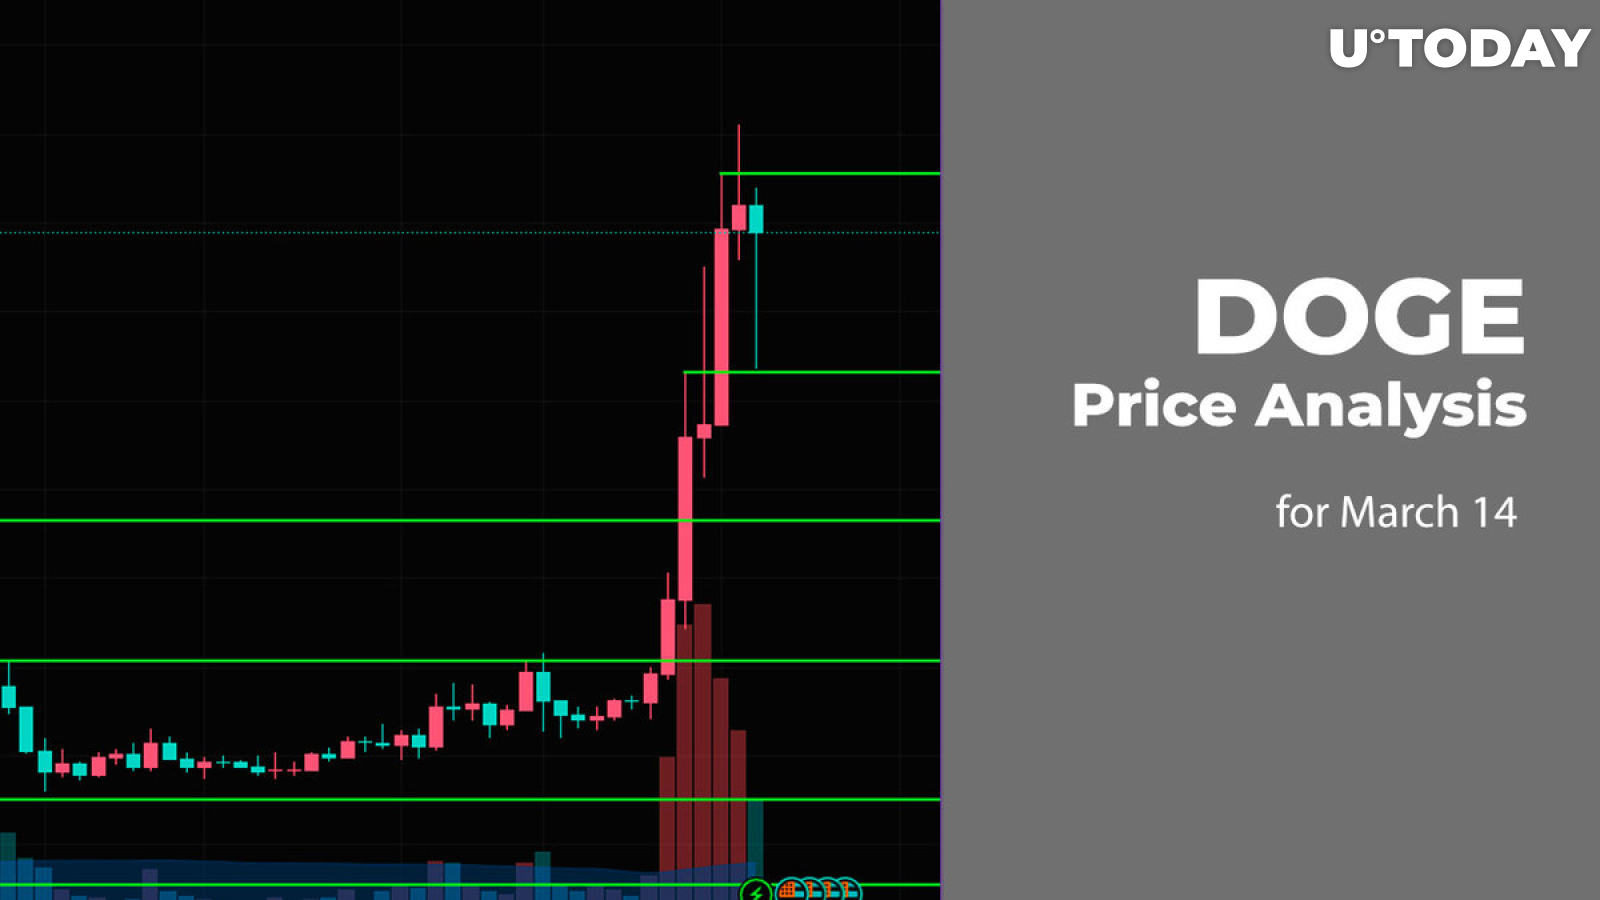 DOGE Price Prediction for March 14